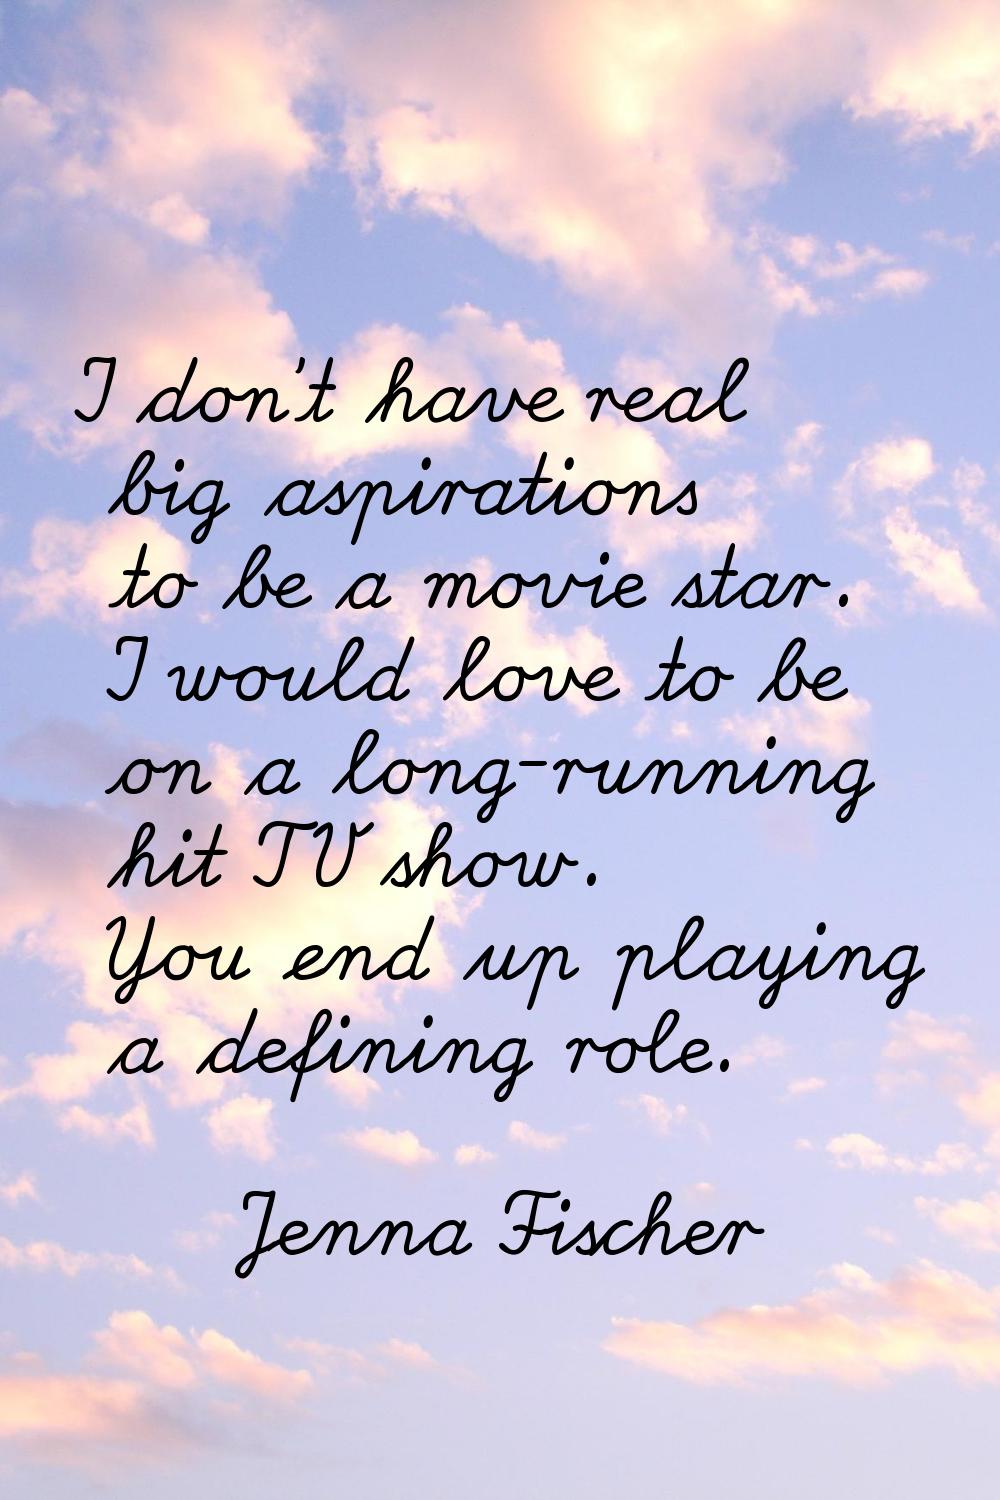 I don't have real big aspirations to be a movie star. I would love to be on a long-running hit TV s